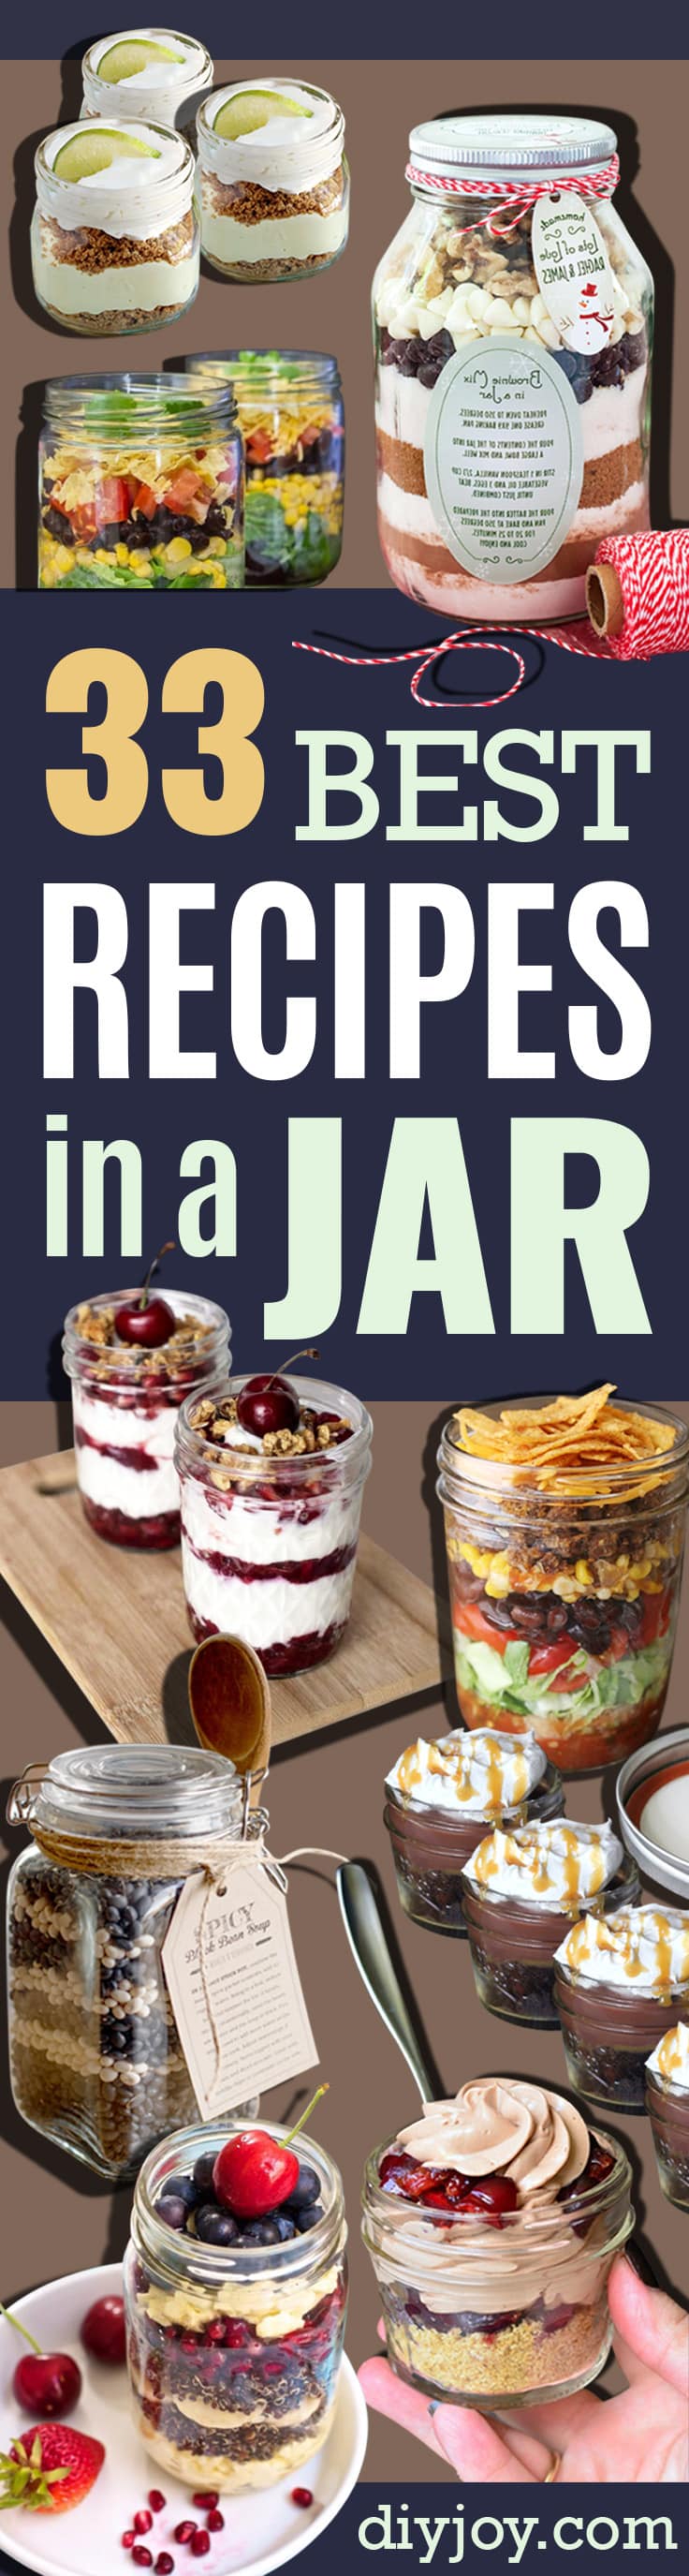 Best Recipes in A Jar - DIY Mason Jar Gifts, Cookie Recipes and Desserts, Canning Ideas, Overnight Oatmeal, How To Make Mason Jar Salad, Healthy Recipes and Printable Labels